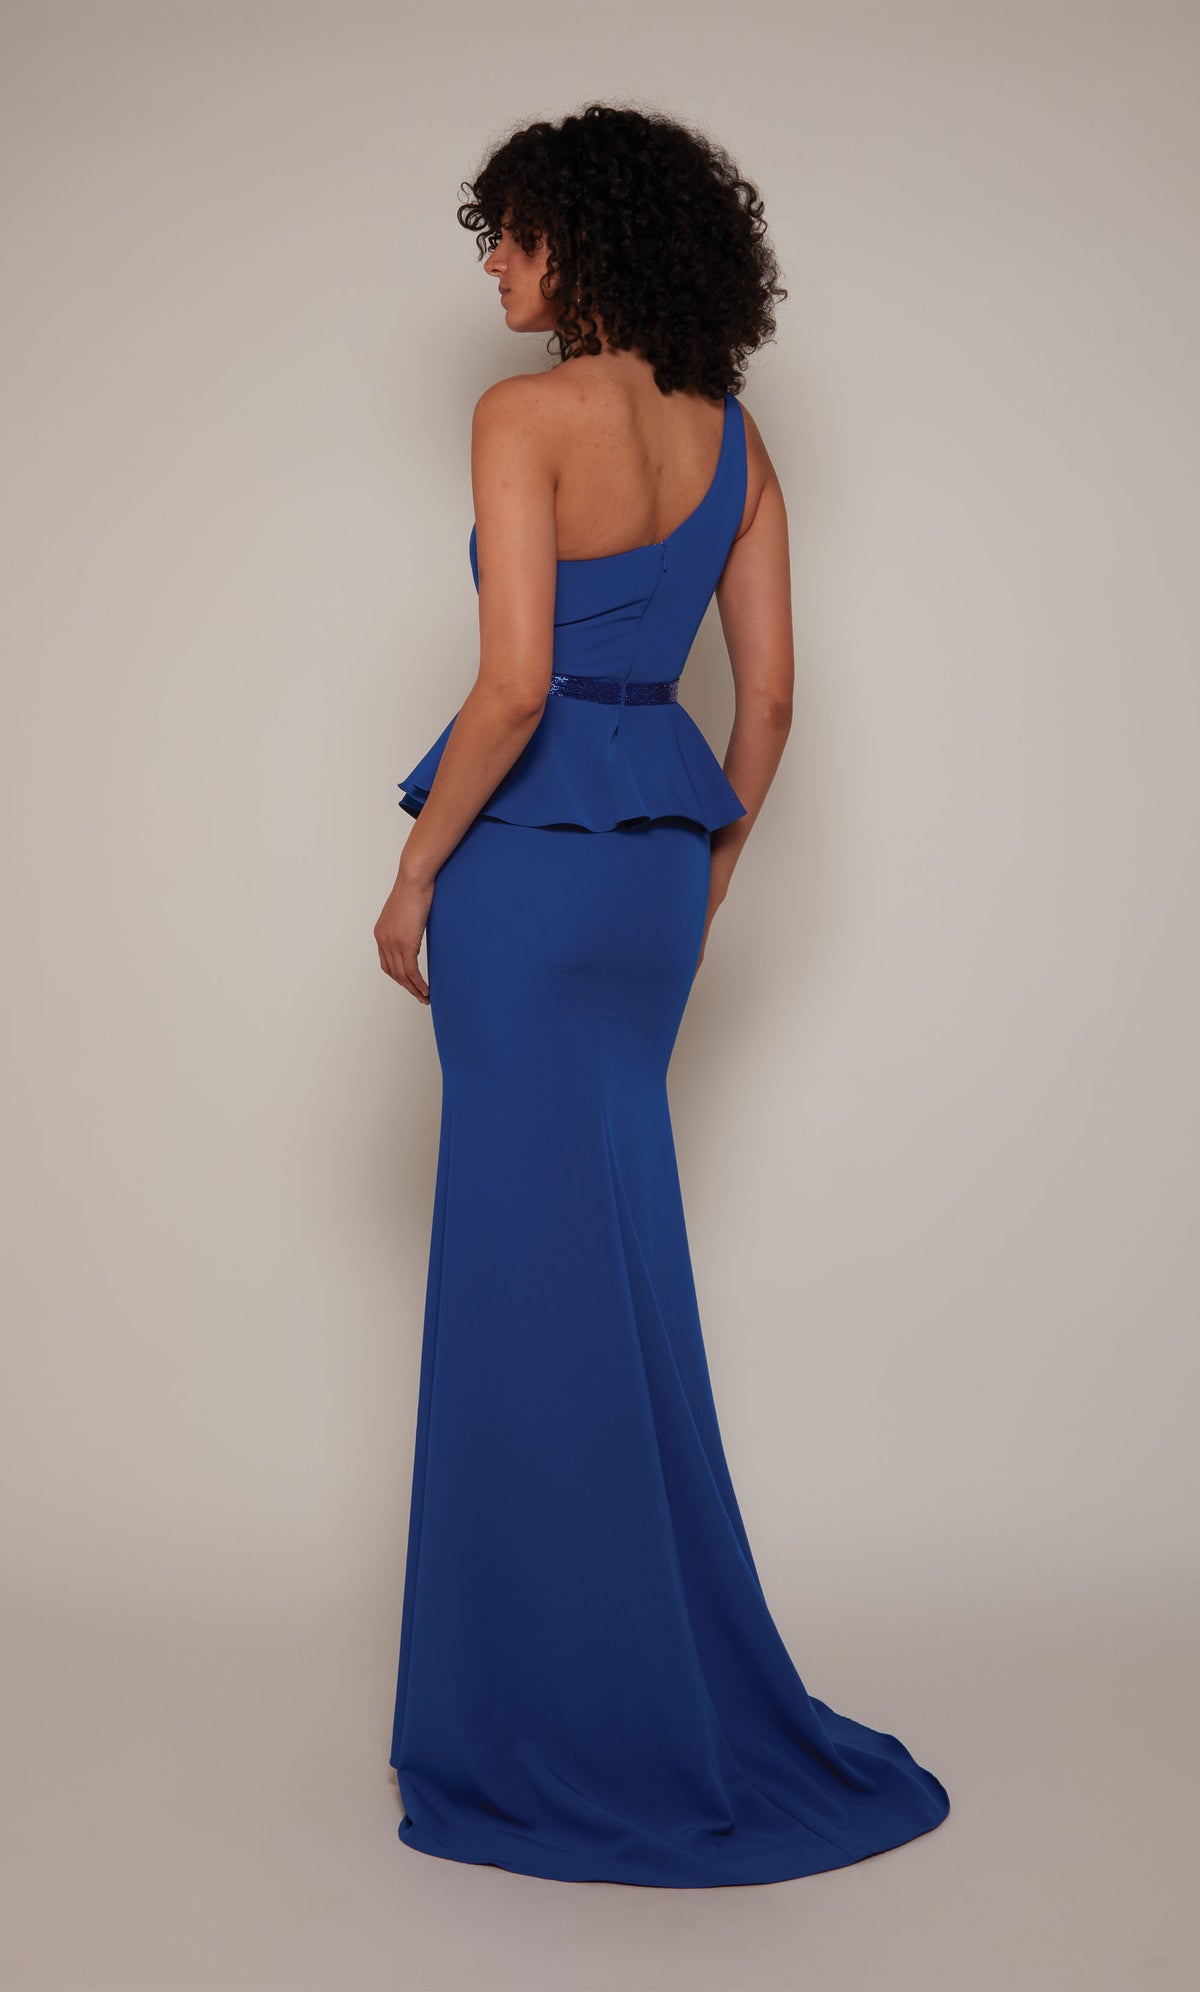 A royal blue, one shoulder mother of the bride dress with a faux beaded belt, peplum bodice, and a slight train.